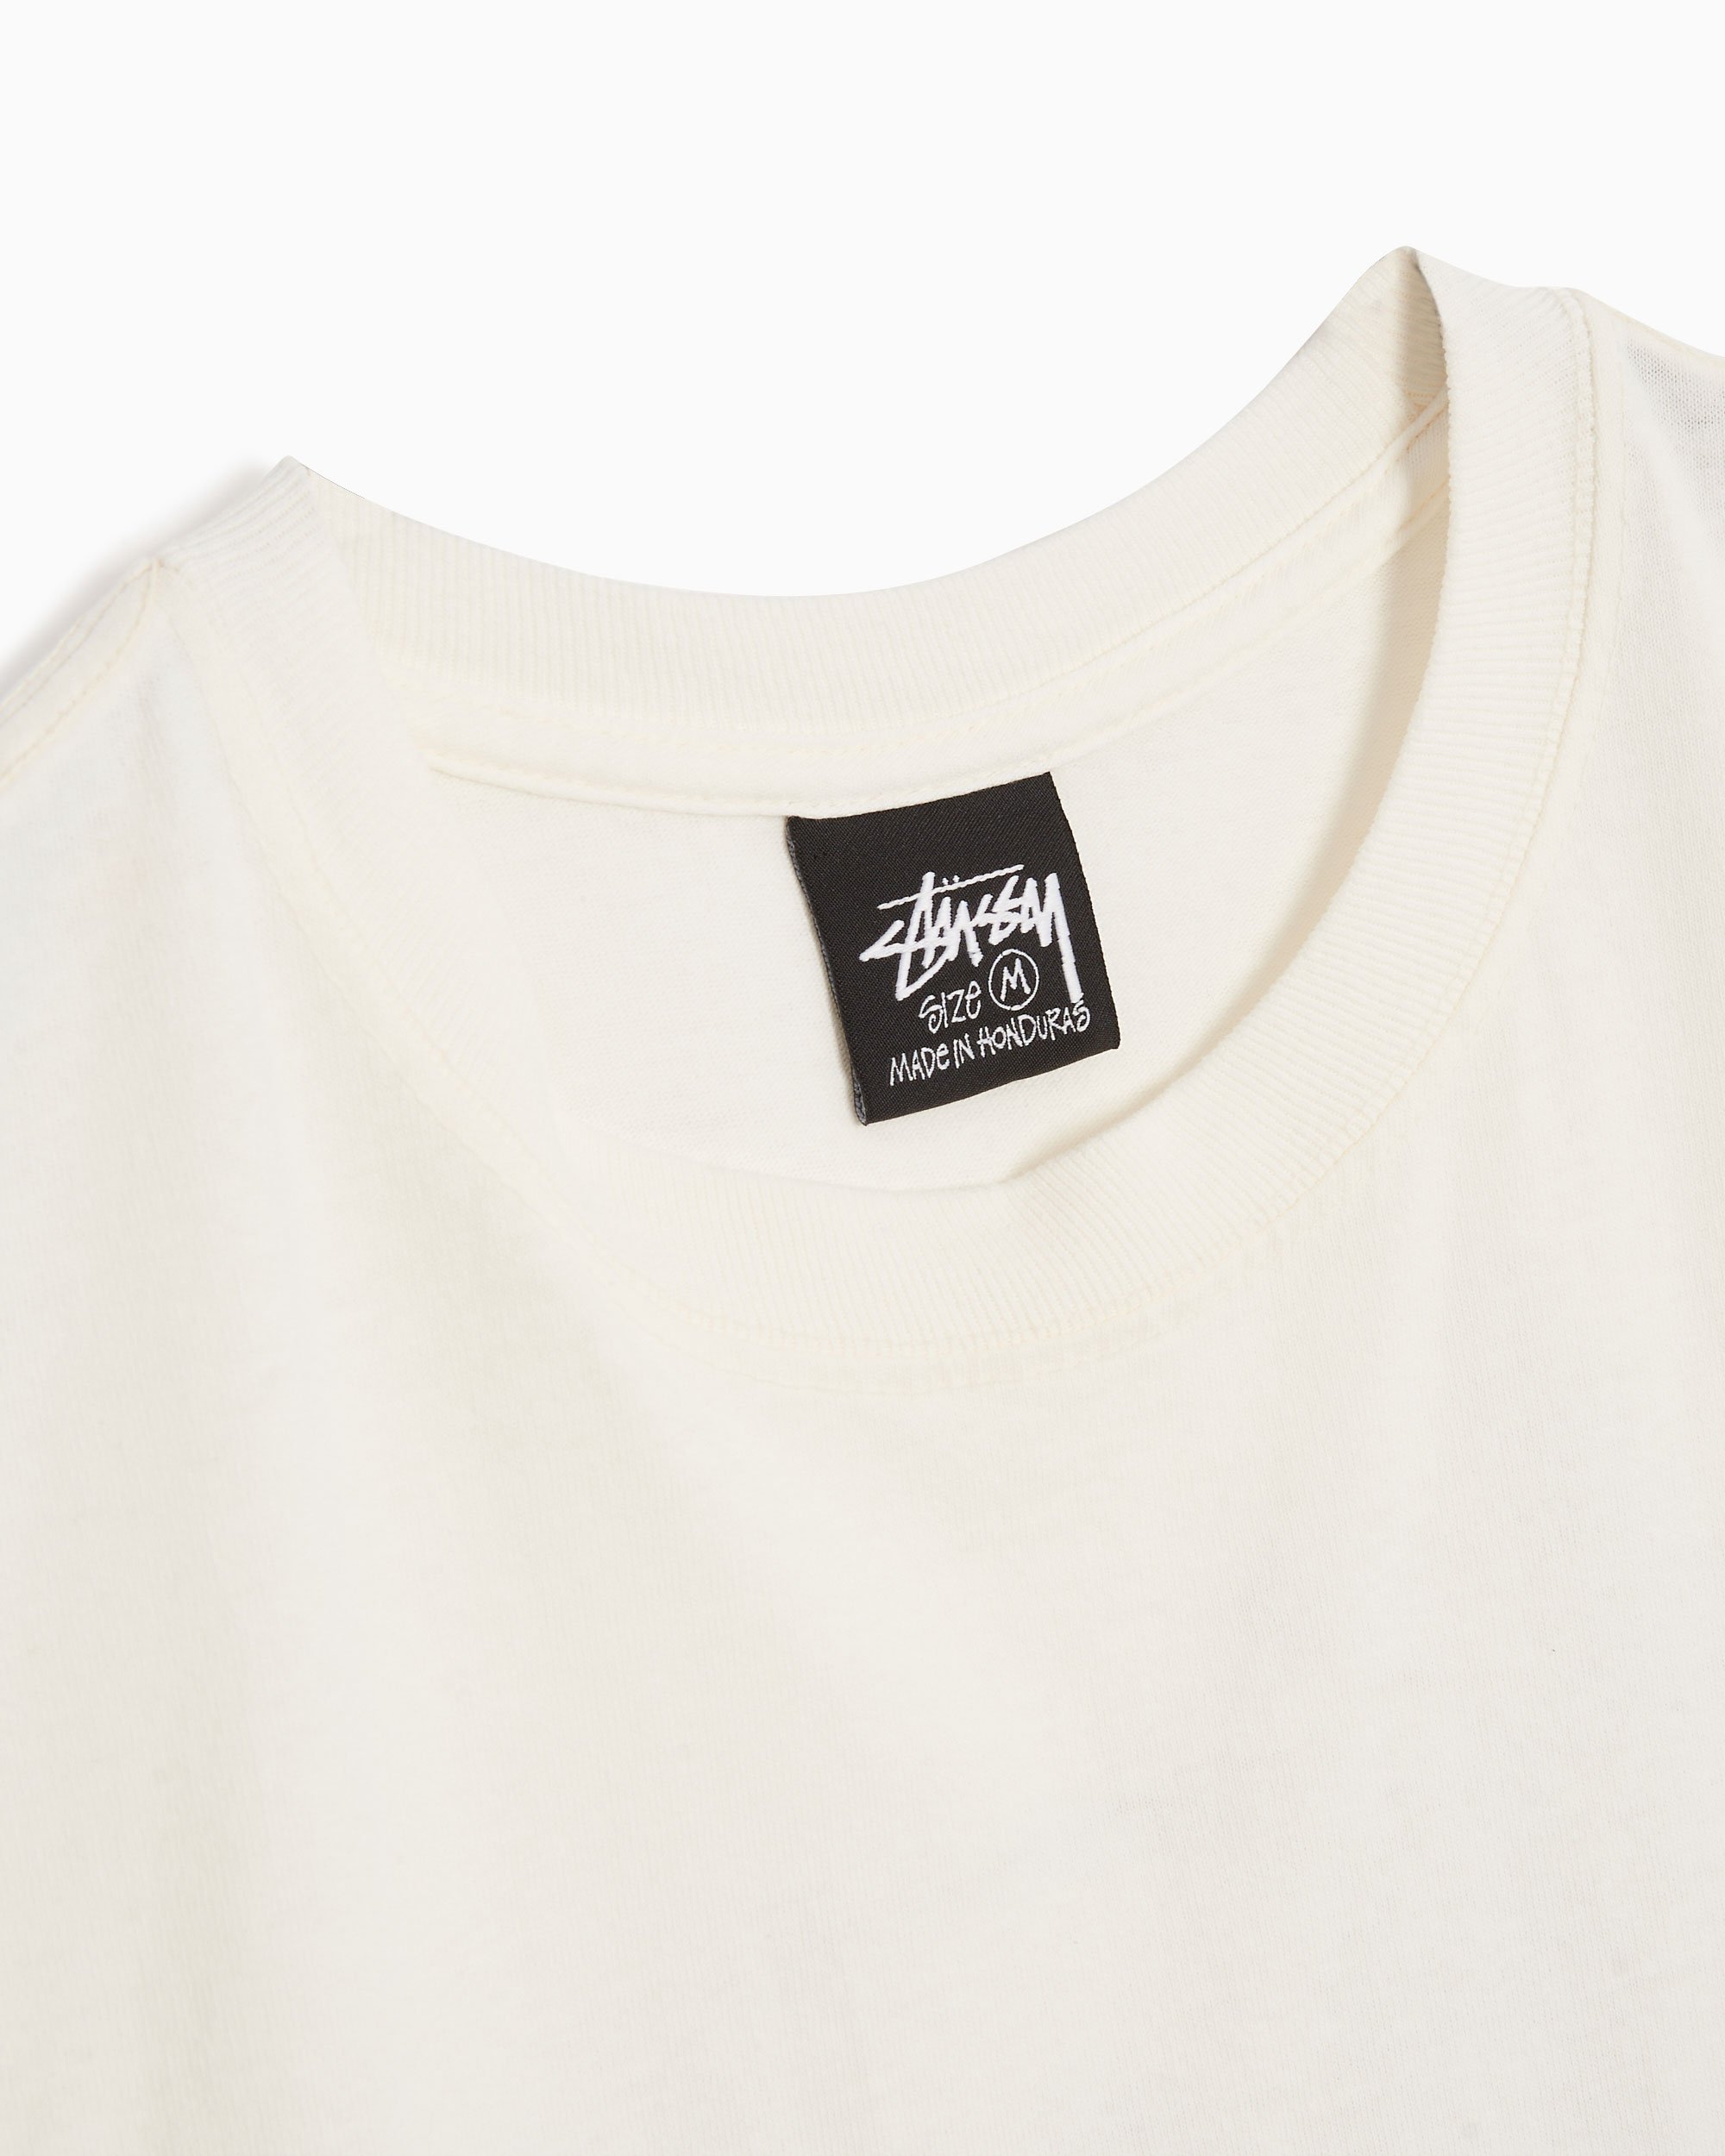 Stüssy Old Phone Pigment Dyed Men's T-Shirt White 1904942